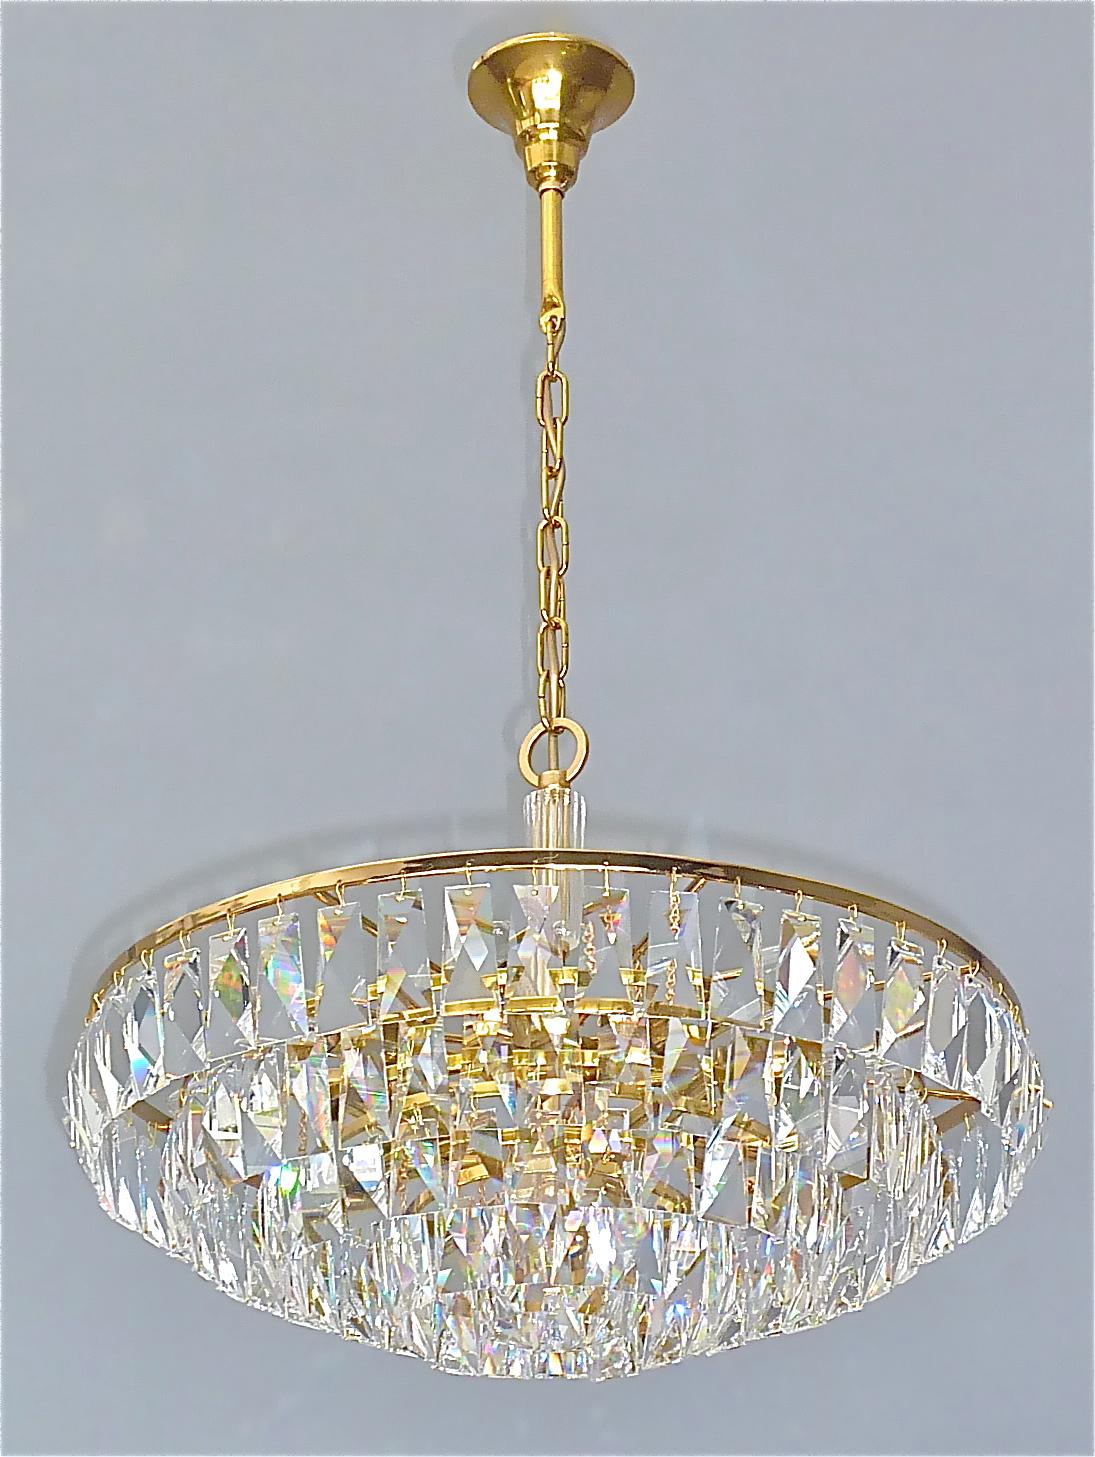 Fine large gilt brass and crystal glass chandelier made by Palwa, Germany, circa 1960. Signed with the company label Palwa inside the canopy the chain-hanging length-adjustable chandelier has a crystal glass stem in the center and five gilt brass